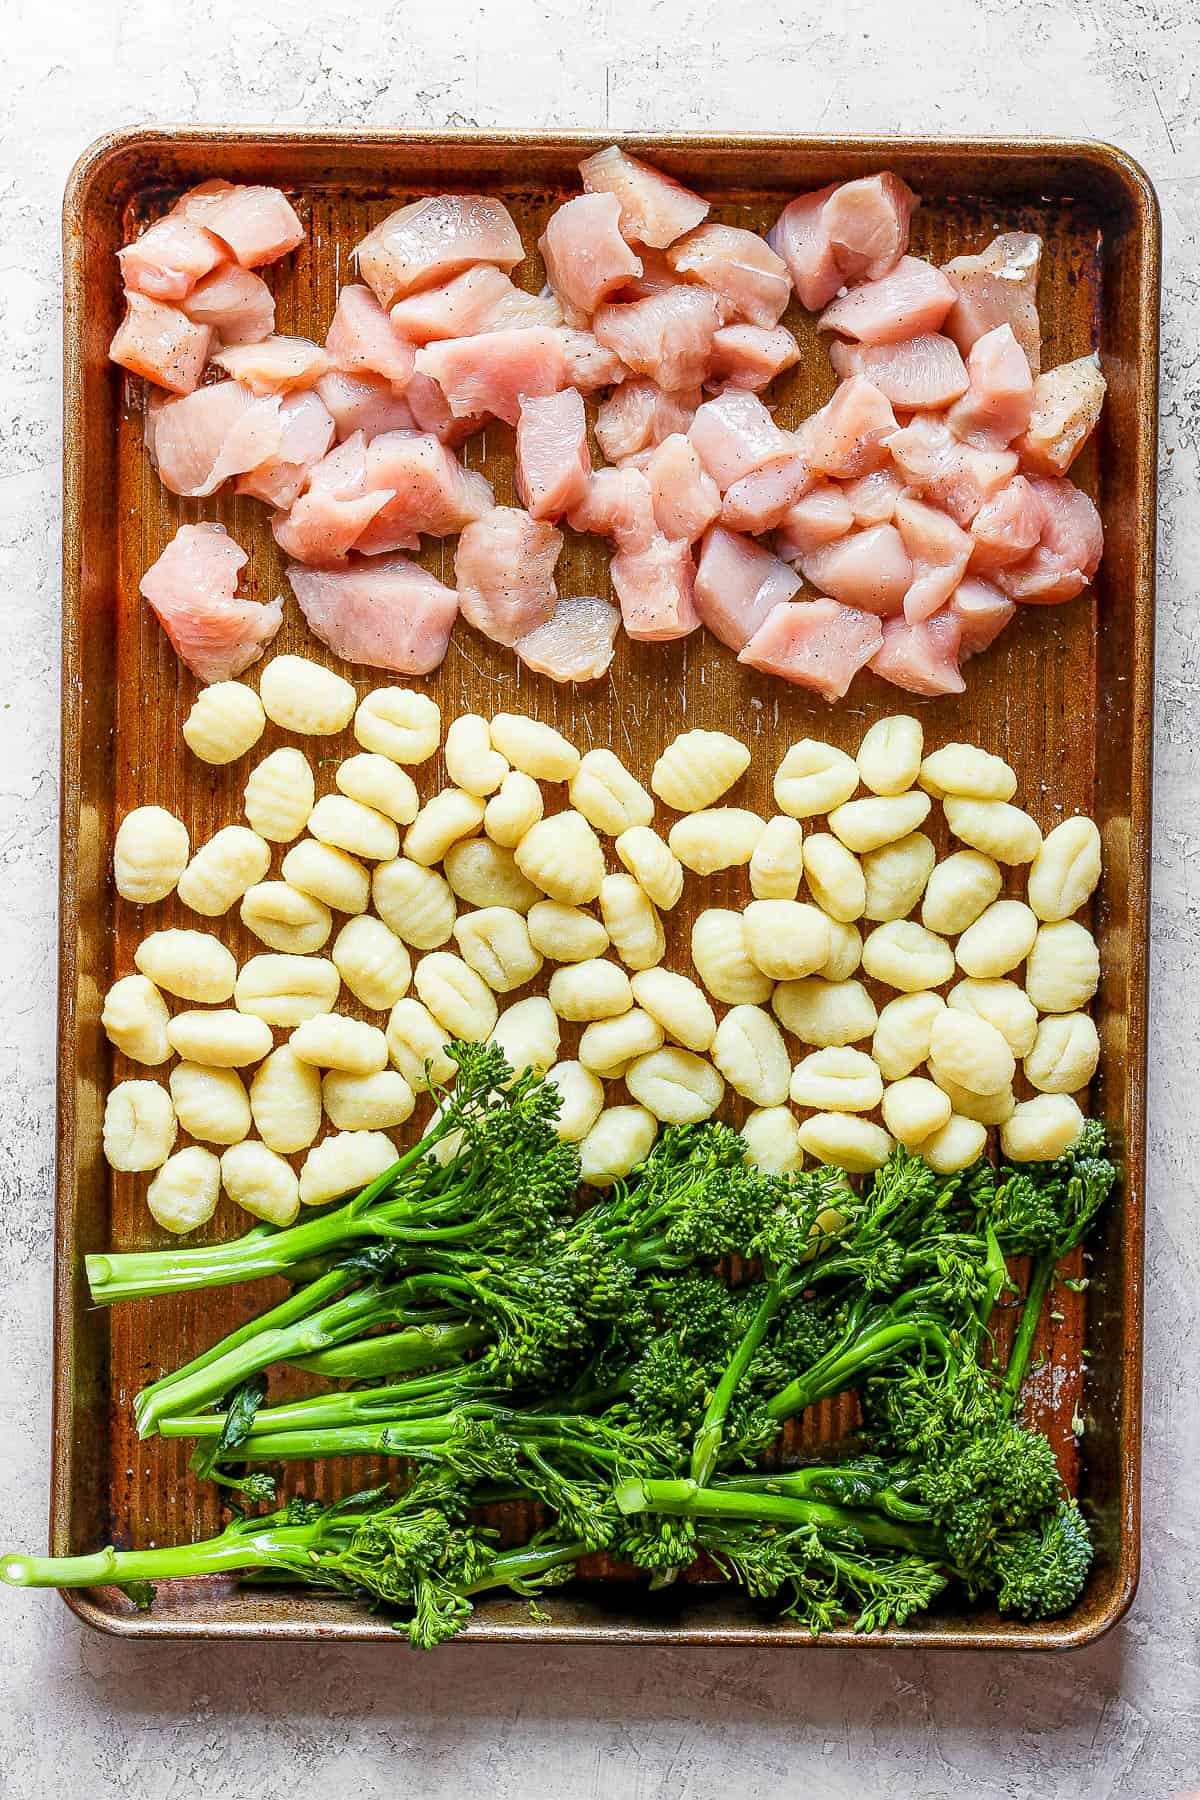 Cubed chicken, gnocchi, and broccolini on a sheet pan.